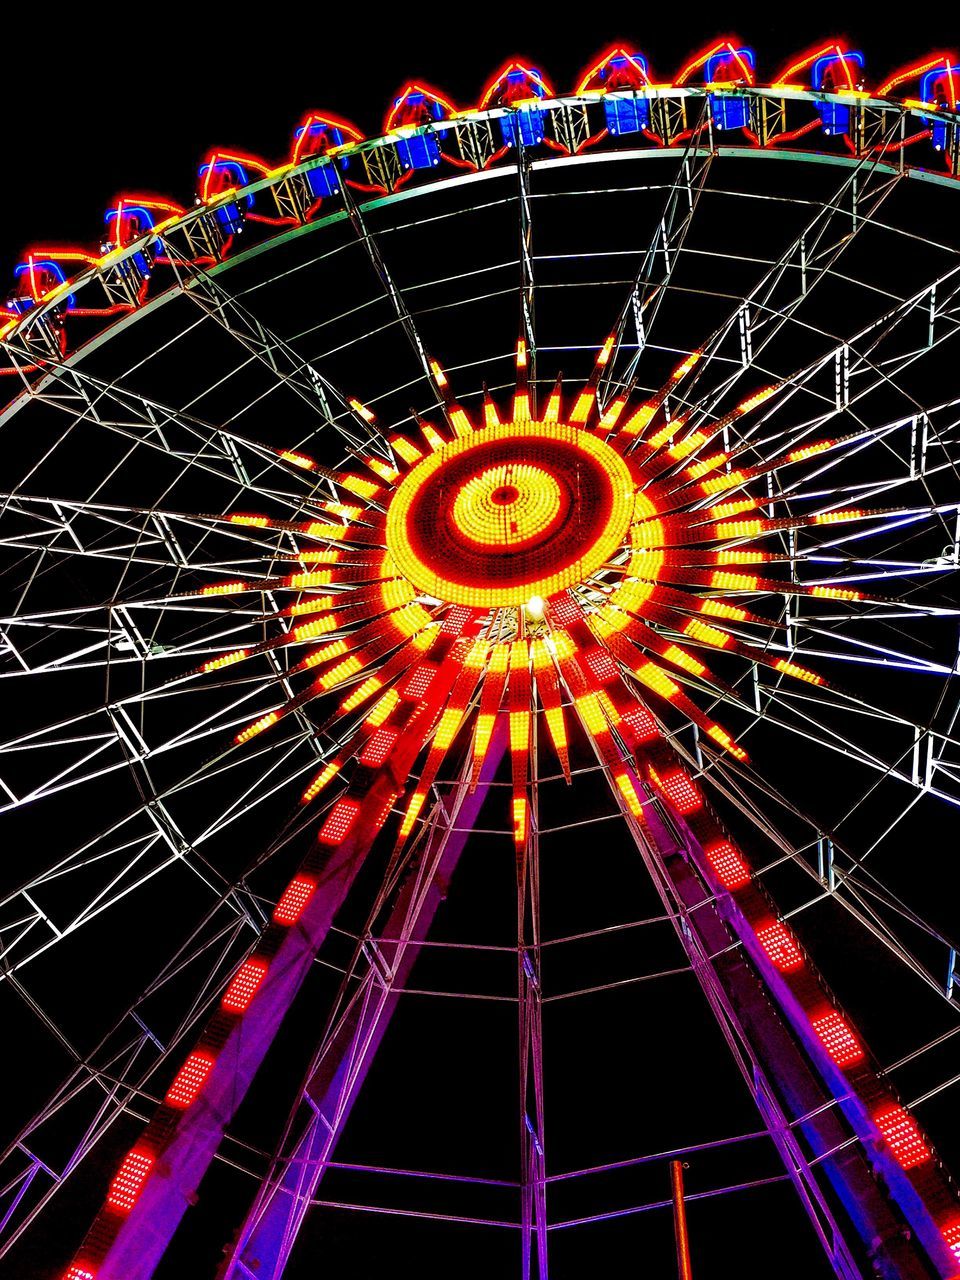 LOW ANGLE VIEW OF ILLUMINATED FERRIS WHEEL AGAINST SKY AT NIGHT